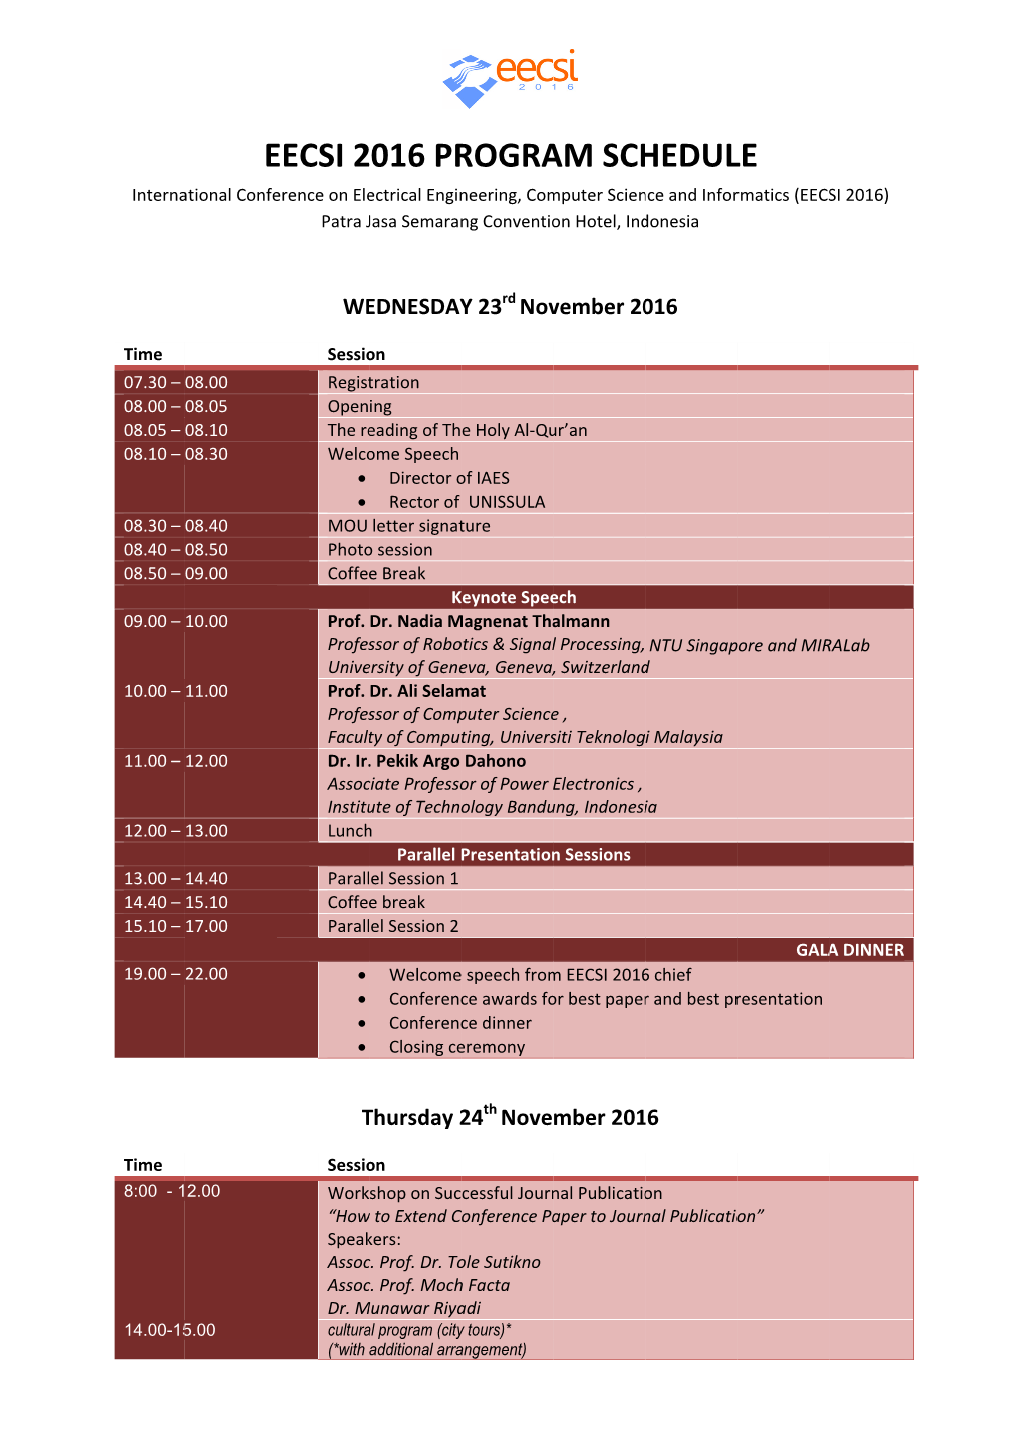 Agenda and Parallel Session Schedule